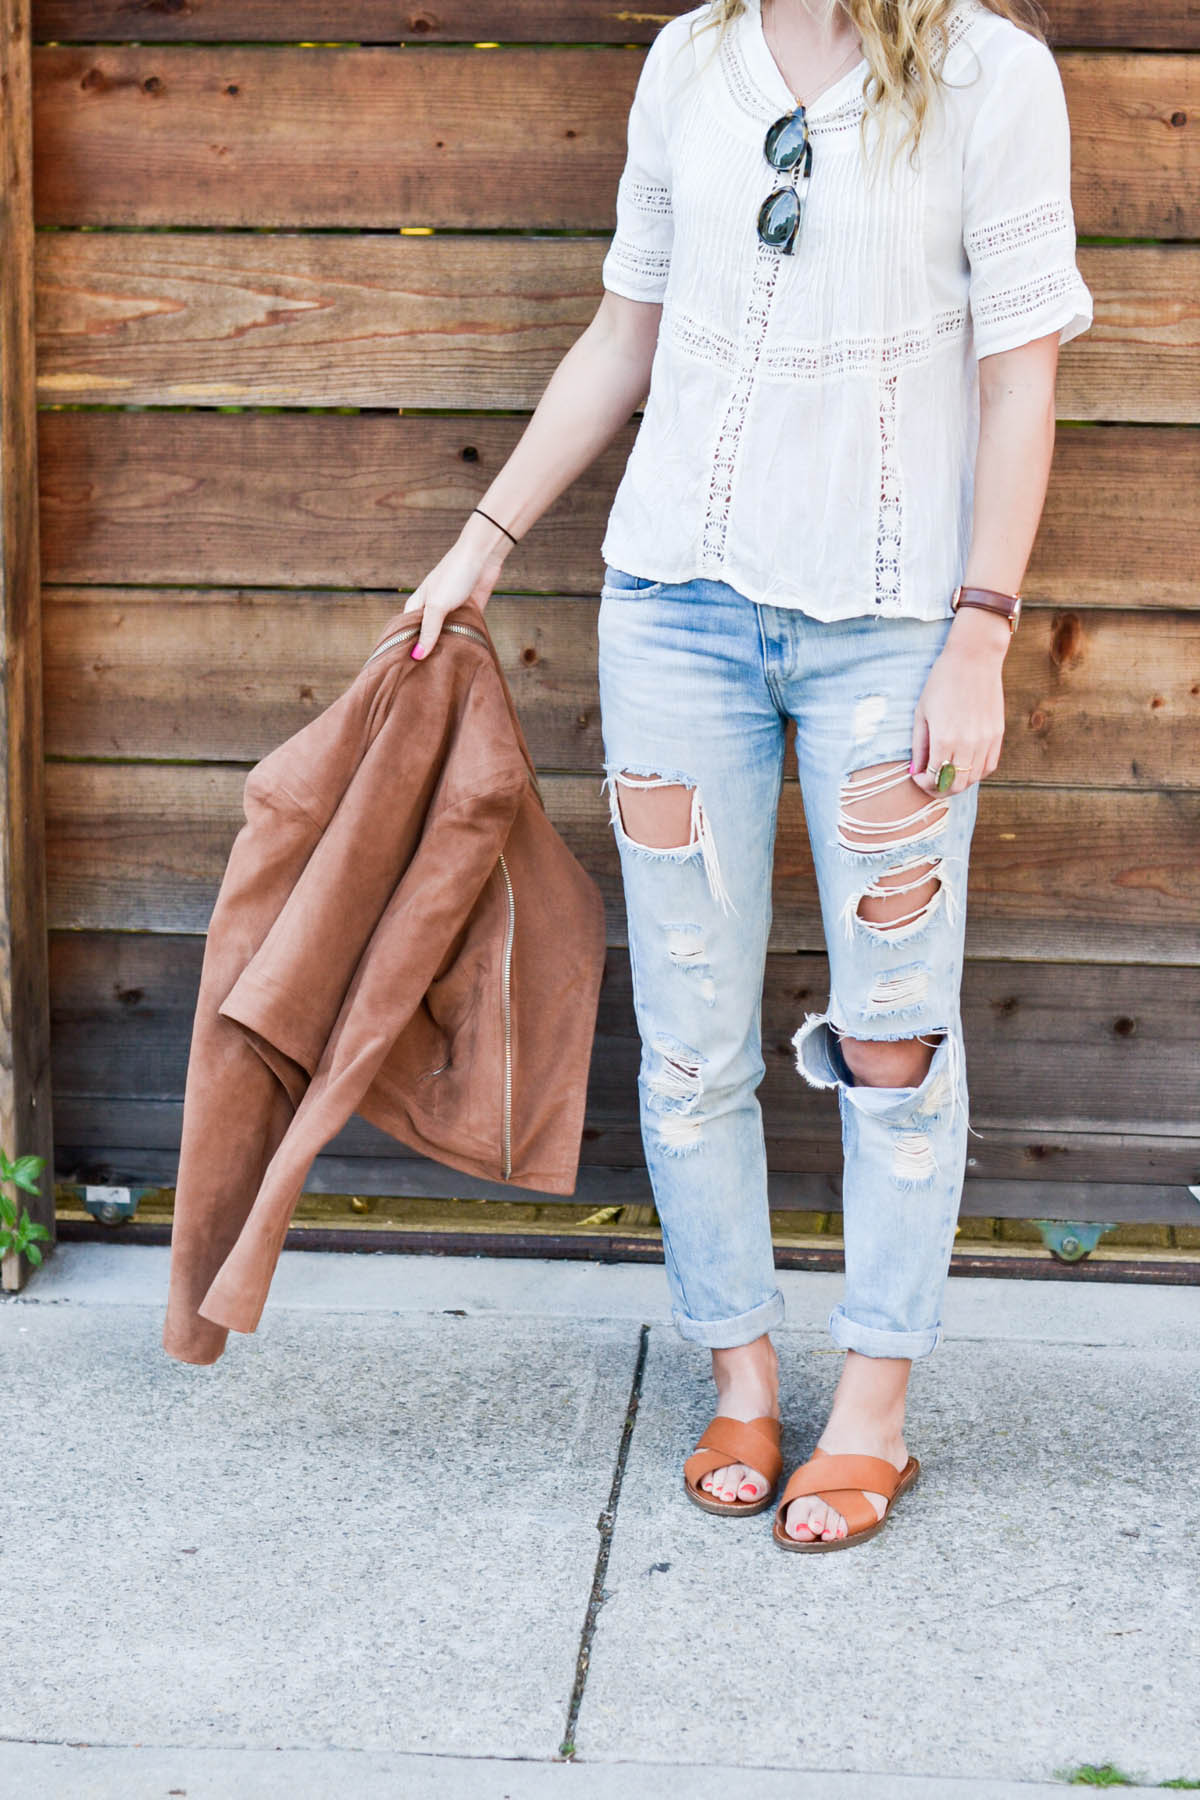 Amanda Holstein in revolve clothing white lace top, madewell sunglasses, brown suede moto jacket, ripped boyfriend jeans, distressed denim, and madewell slides brown leather sandals